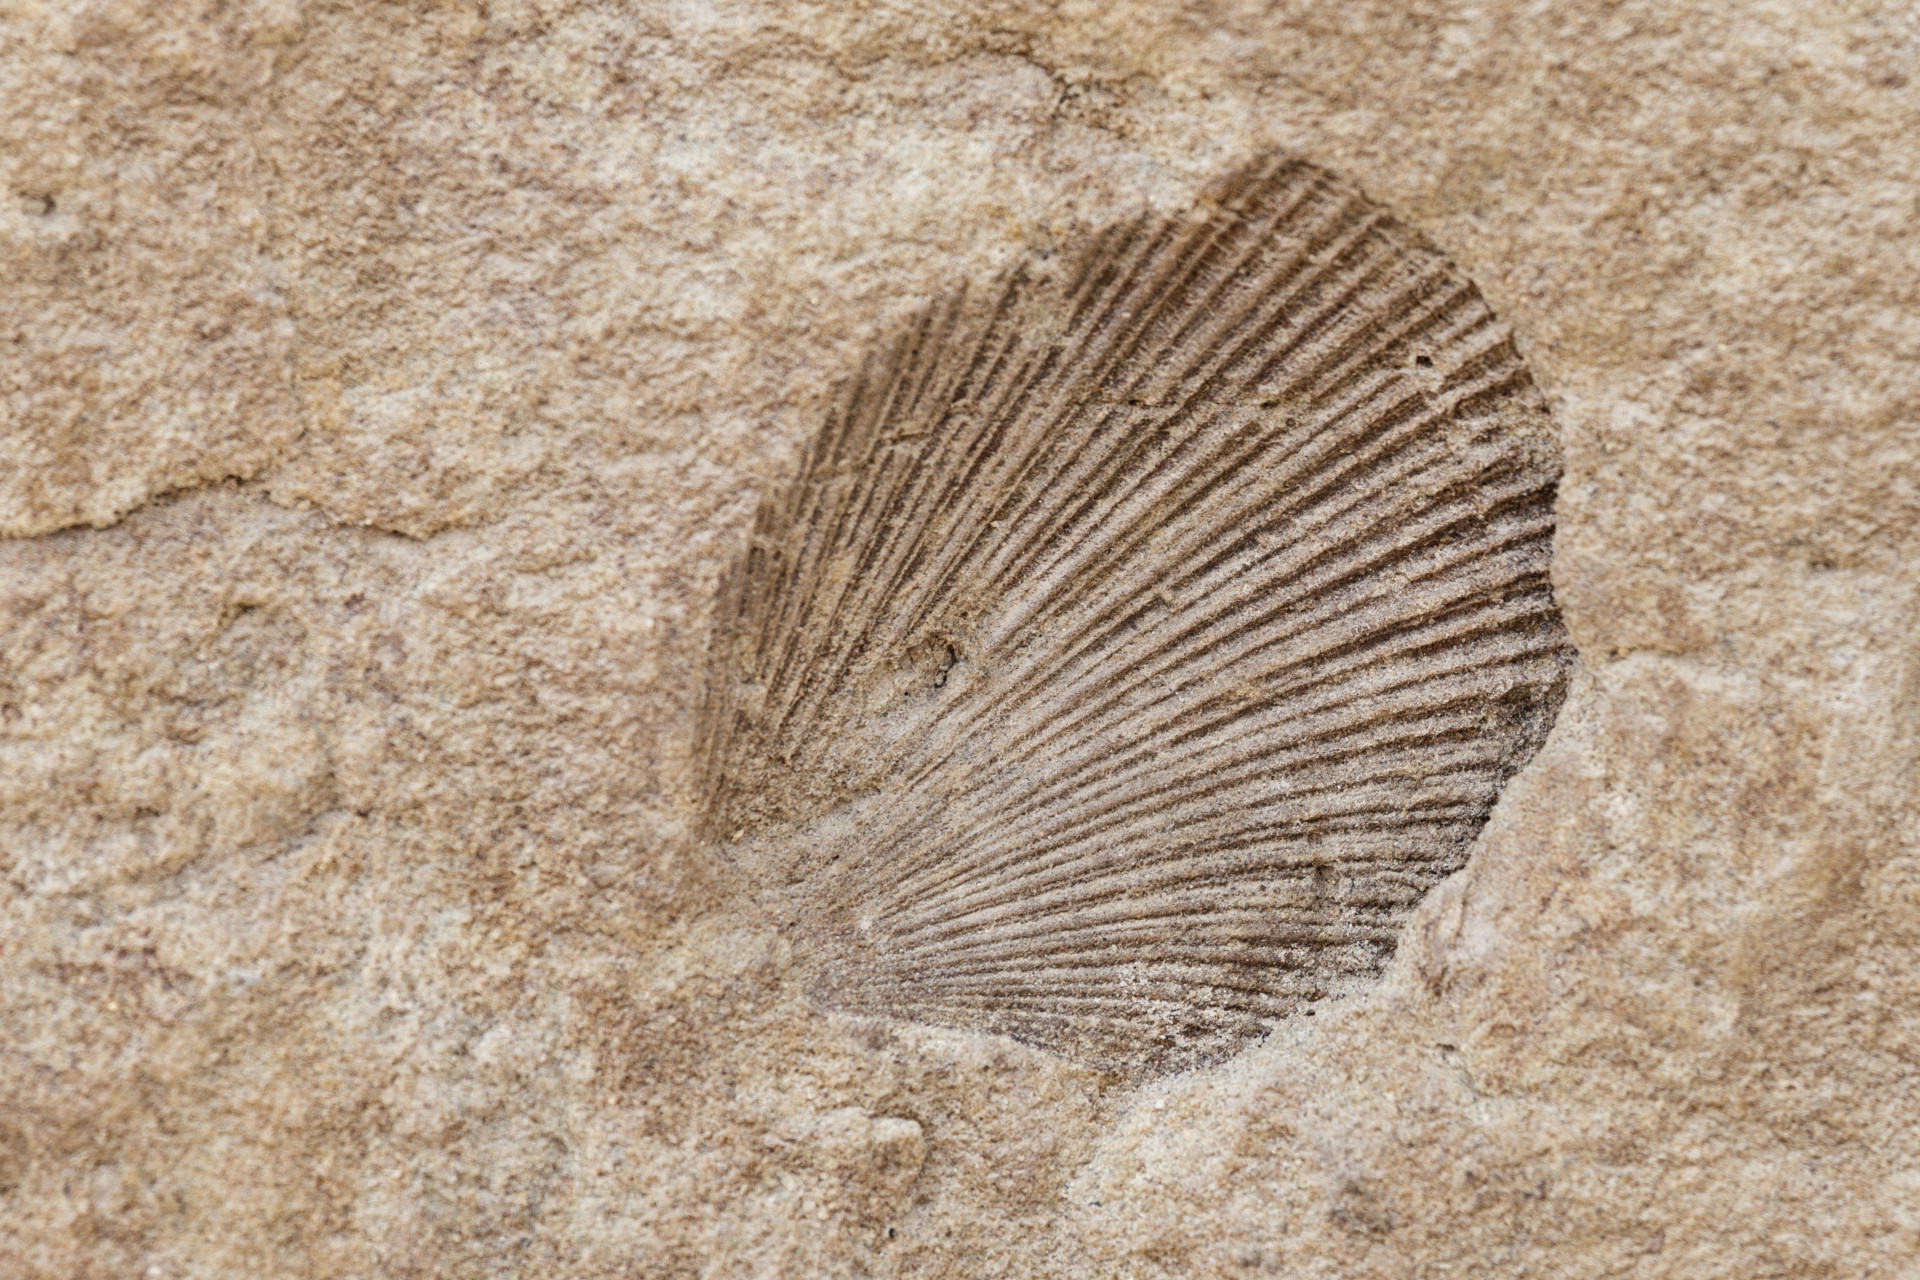 a-shell-fossil-free-stock-photo-public-domain-pictures